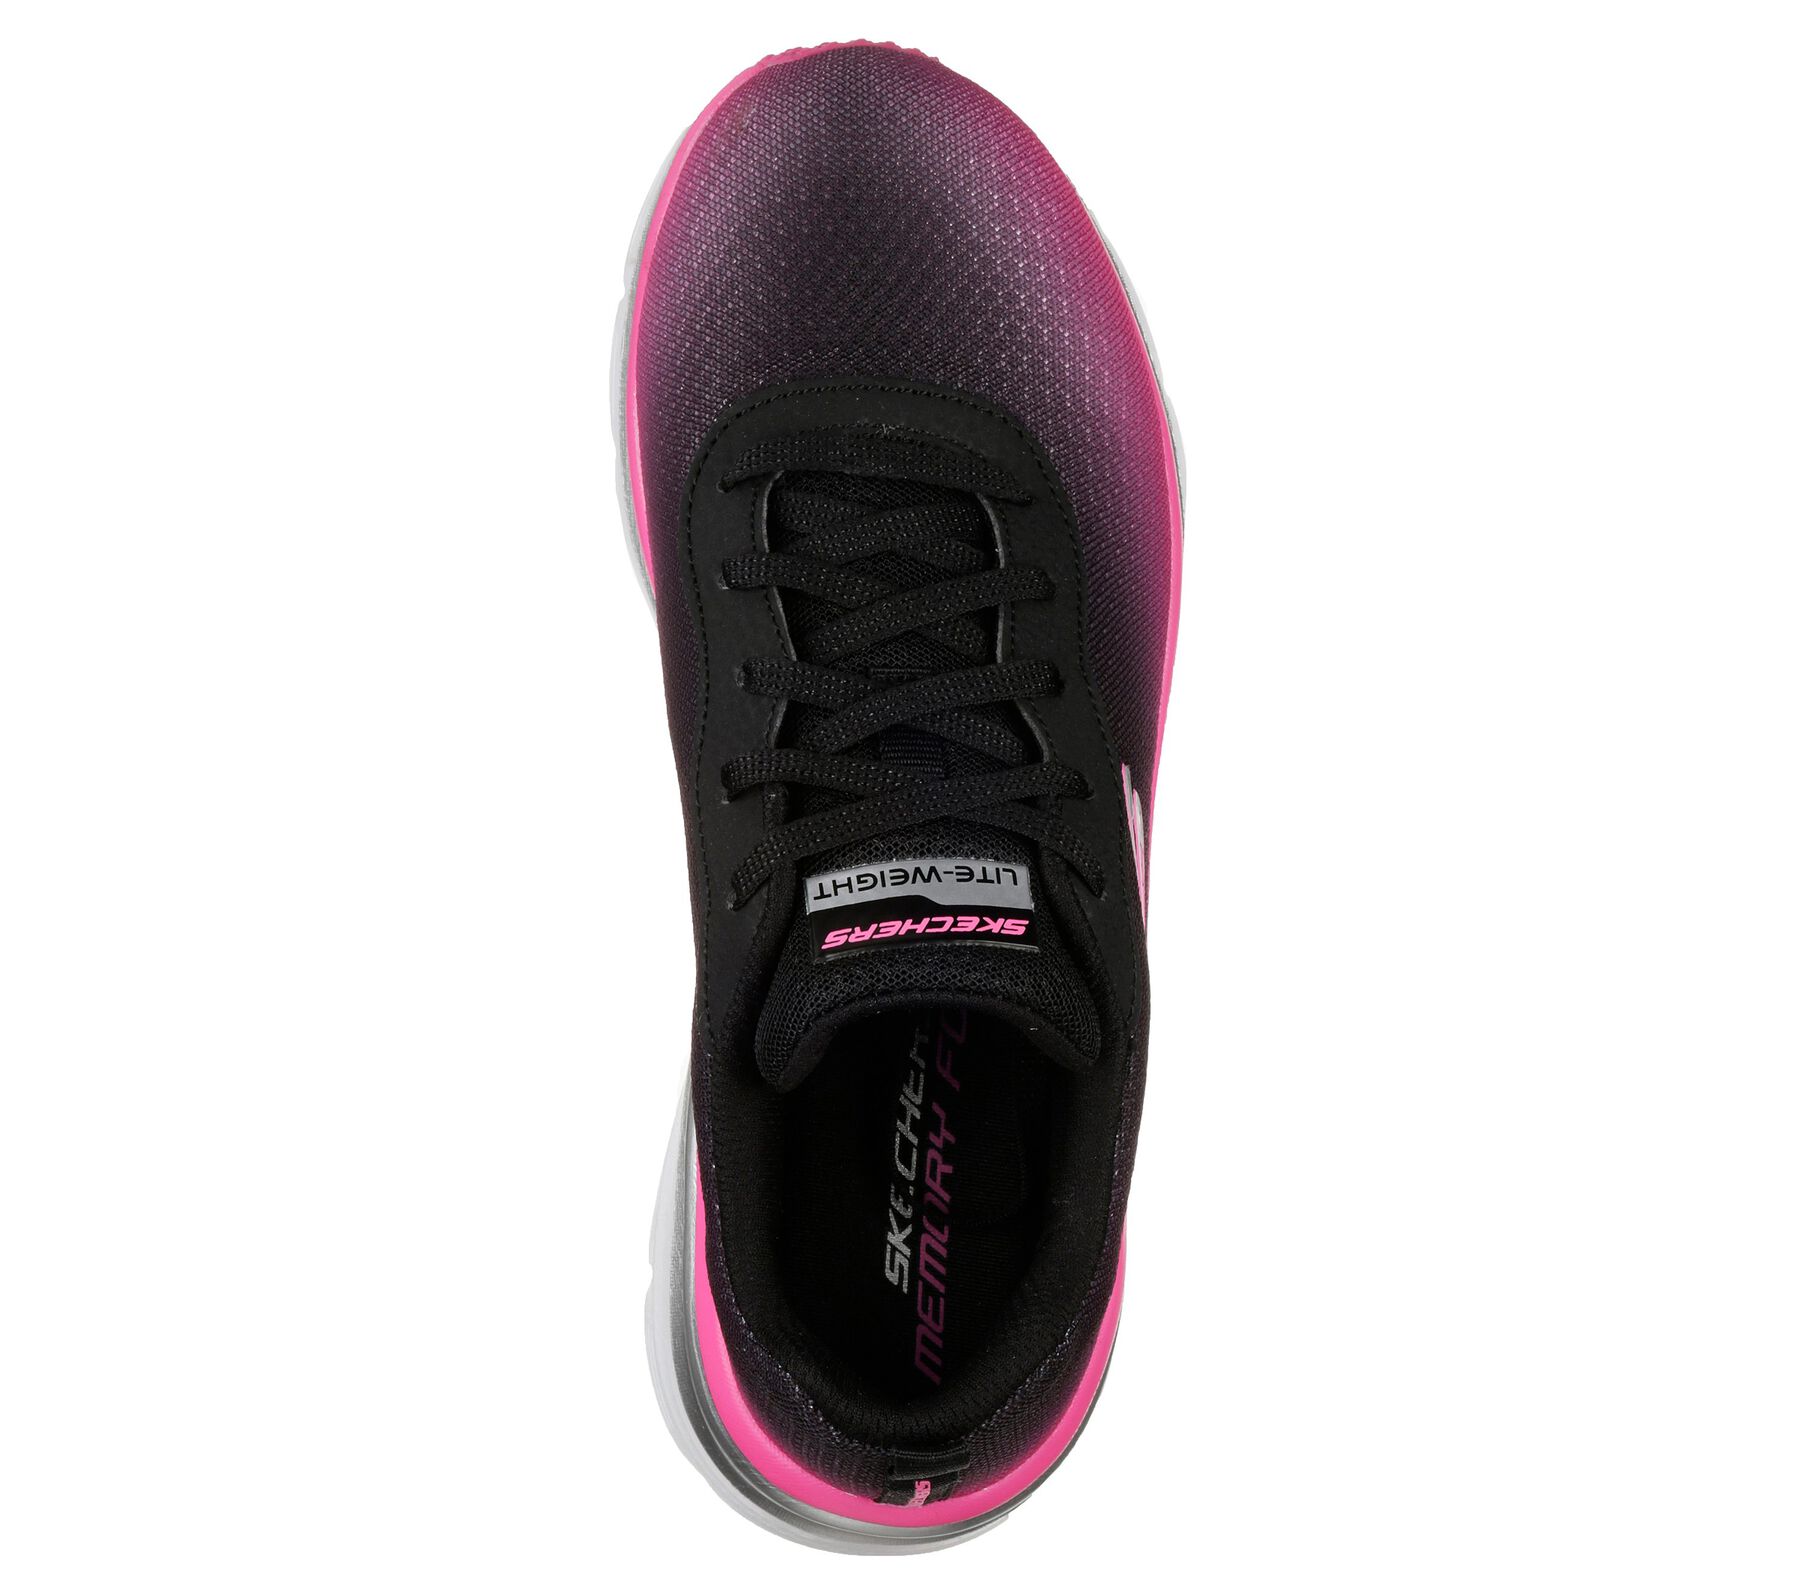 Fashion Fit - Build Up | SKECHERS